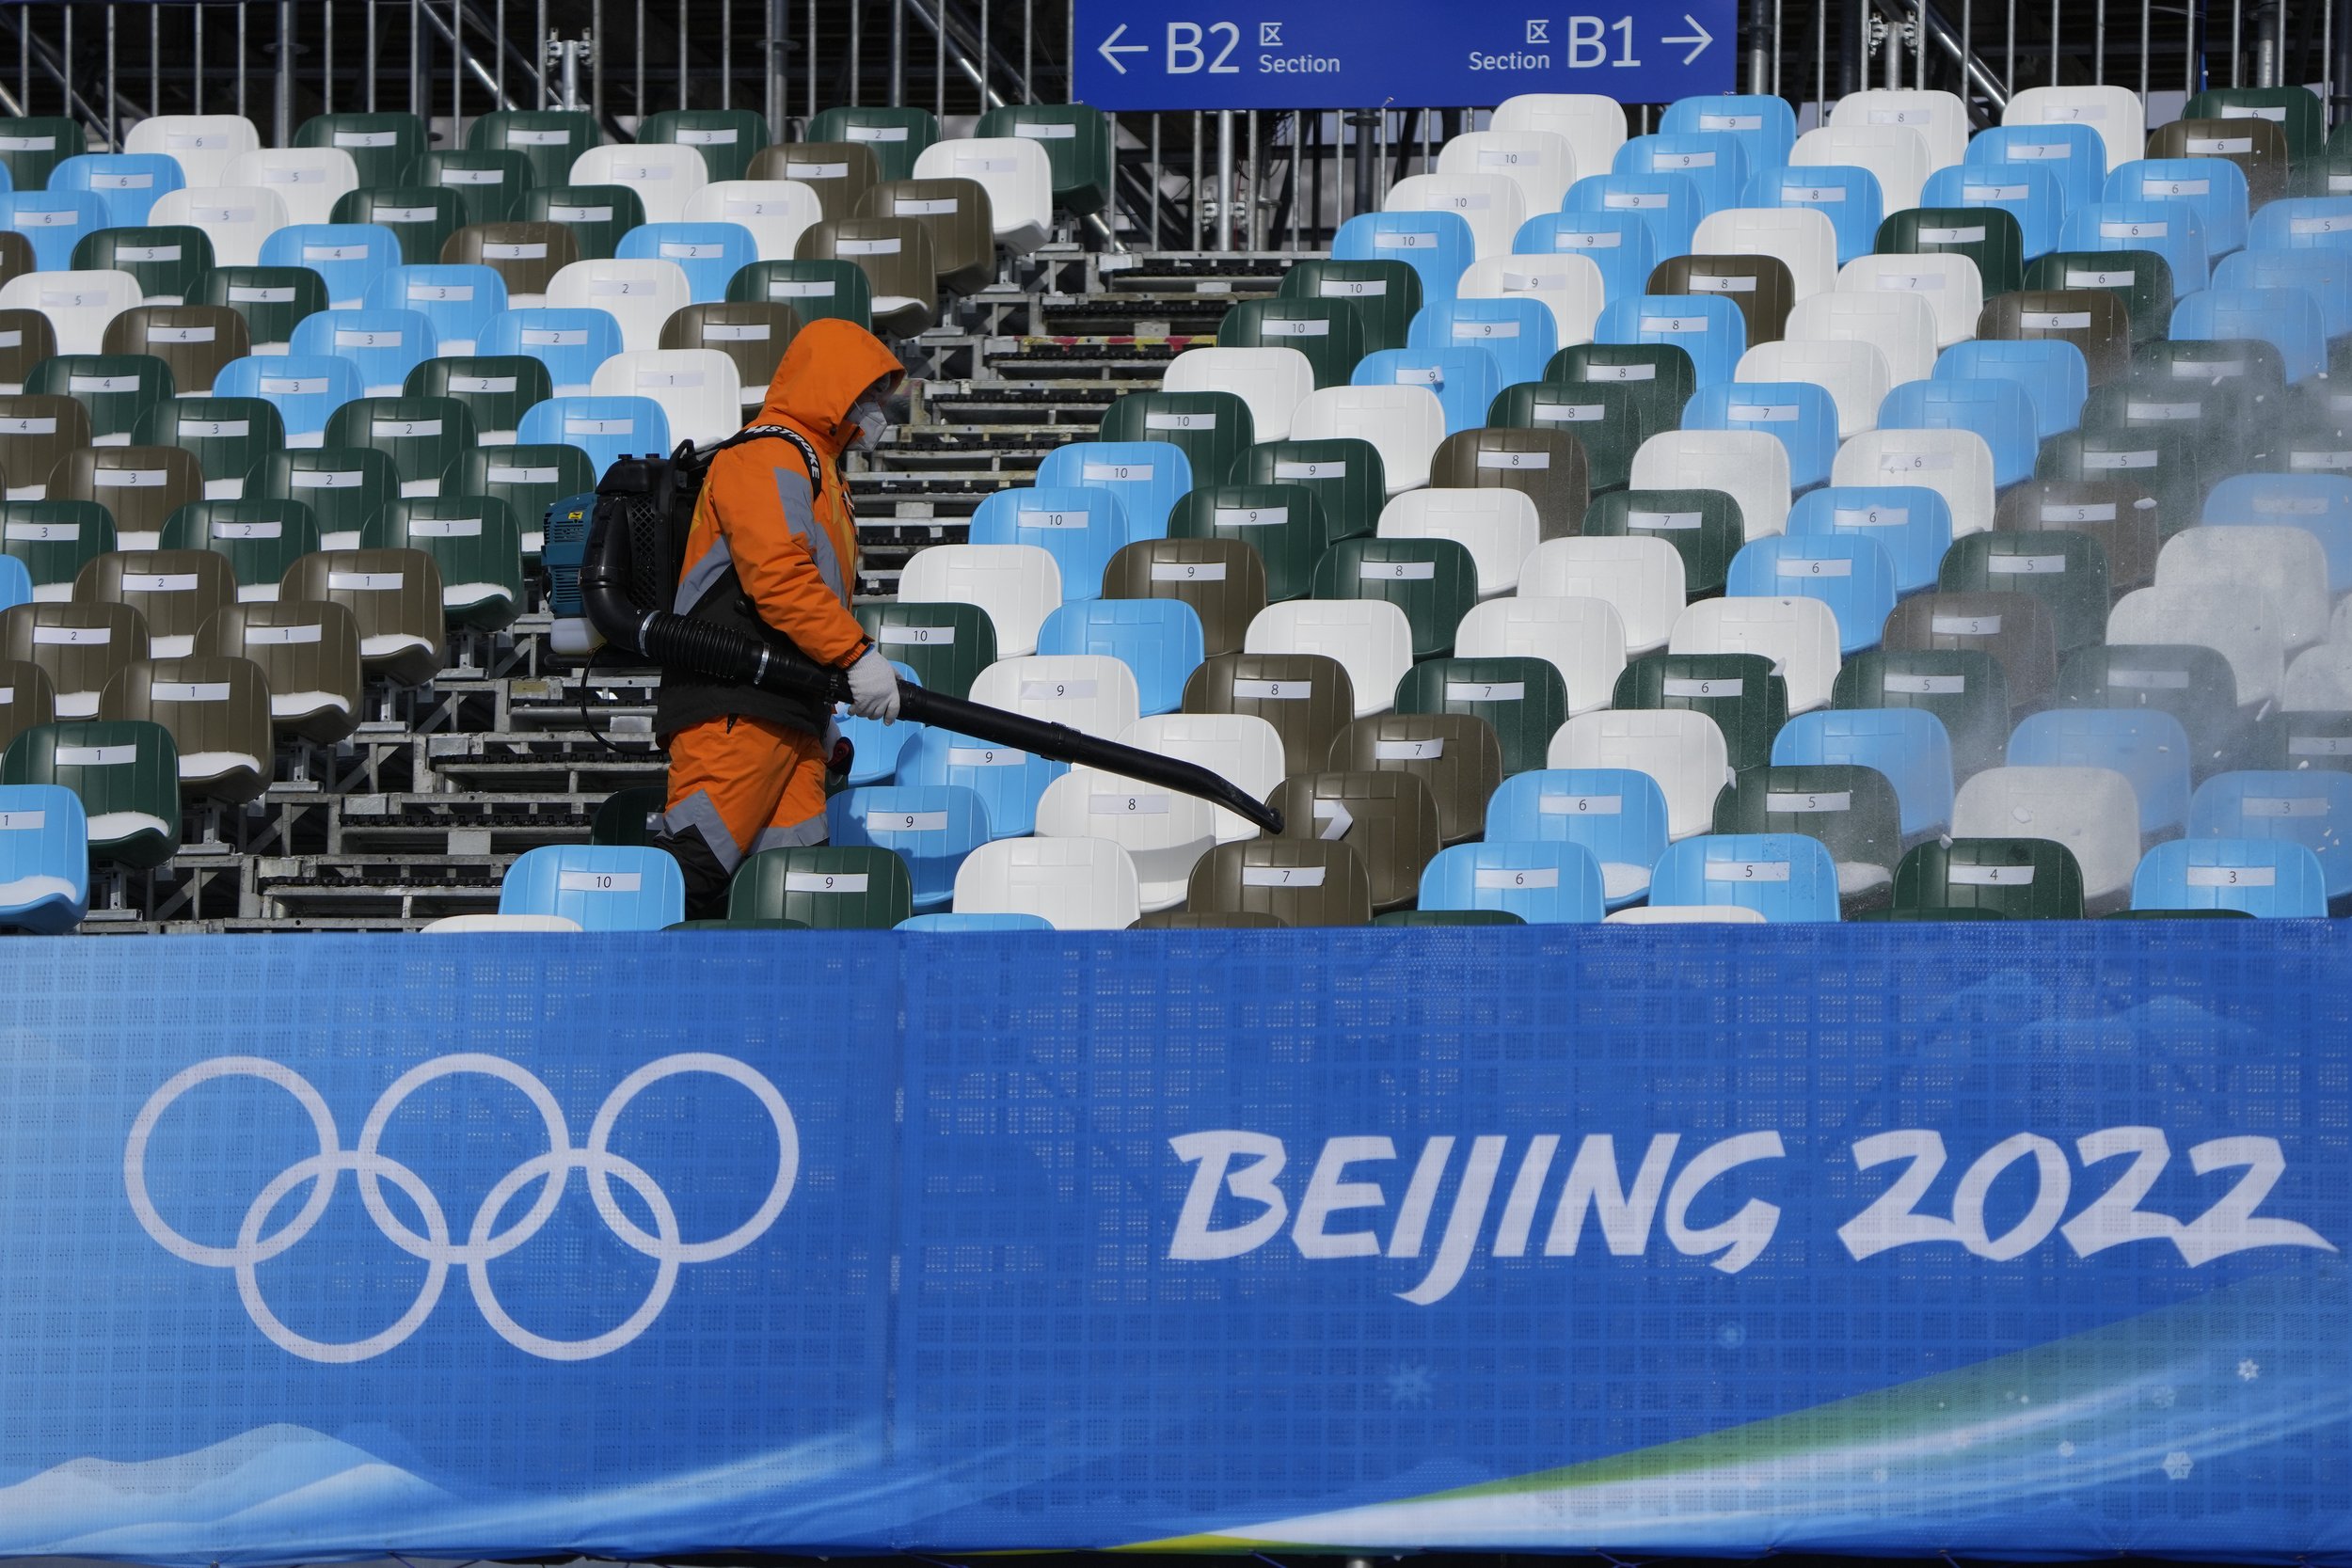  A worker blows off the snow in the seating area at Genting Snow Park prior to the 2022 Winter Olympics, Jan. 31, 2022, in Zhangjiakou, China. (AP Photo/Lee Jin-man) 